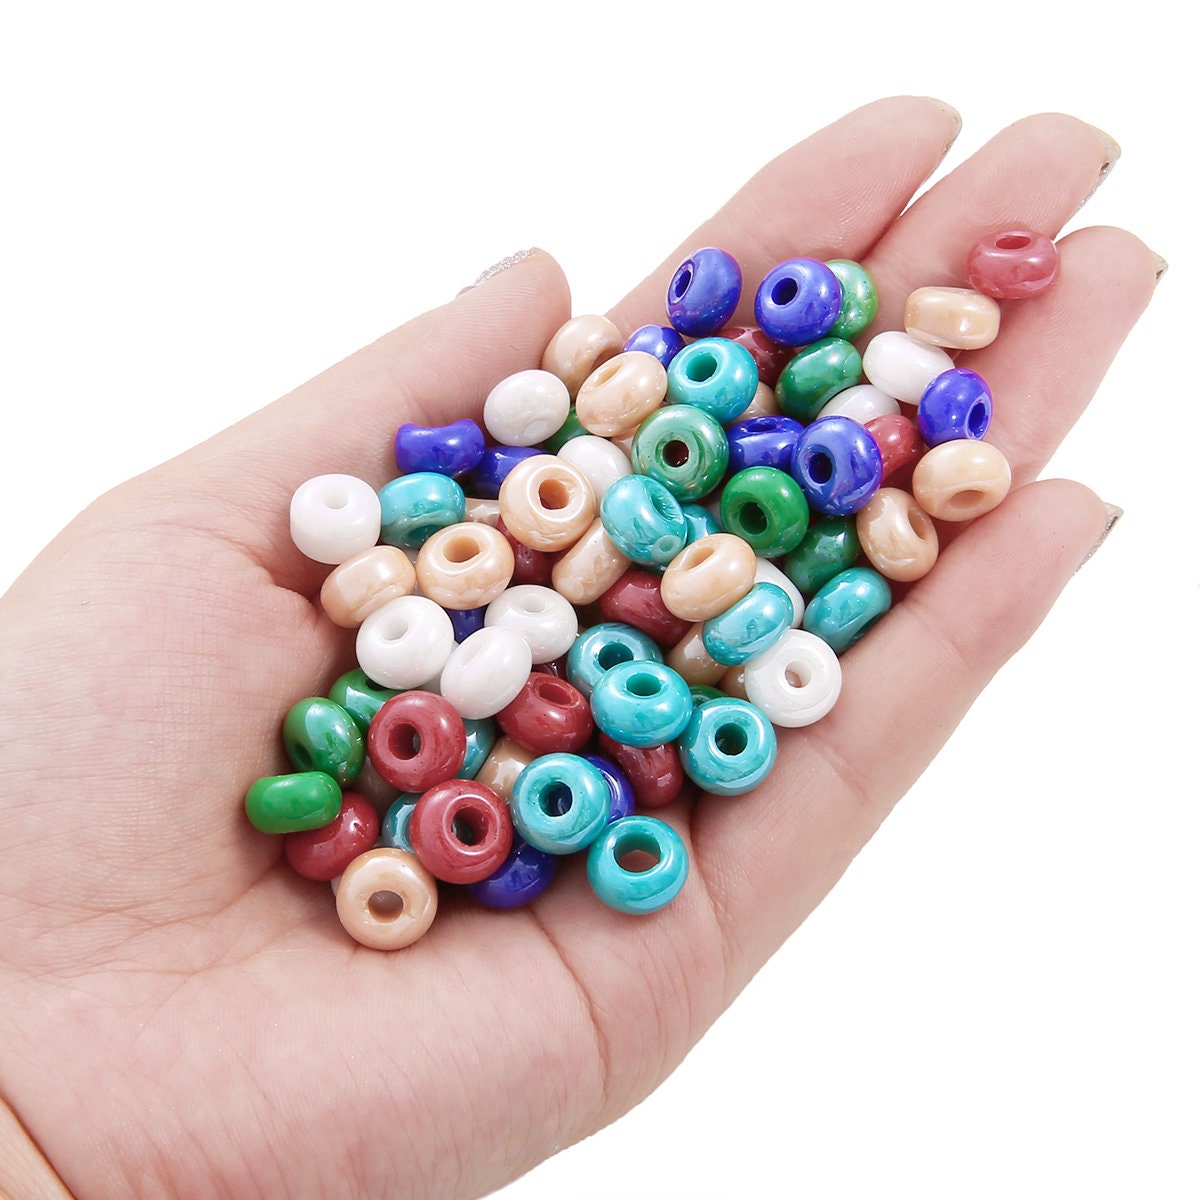 10x6mm Flat Round Glass Beads With Big Hole 2.5mm Hole Size 30 Pieces  Abacus Shape Beads Rondelle Seed Beads Donut Seed Beads 